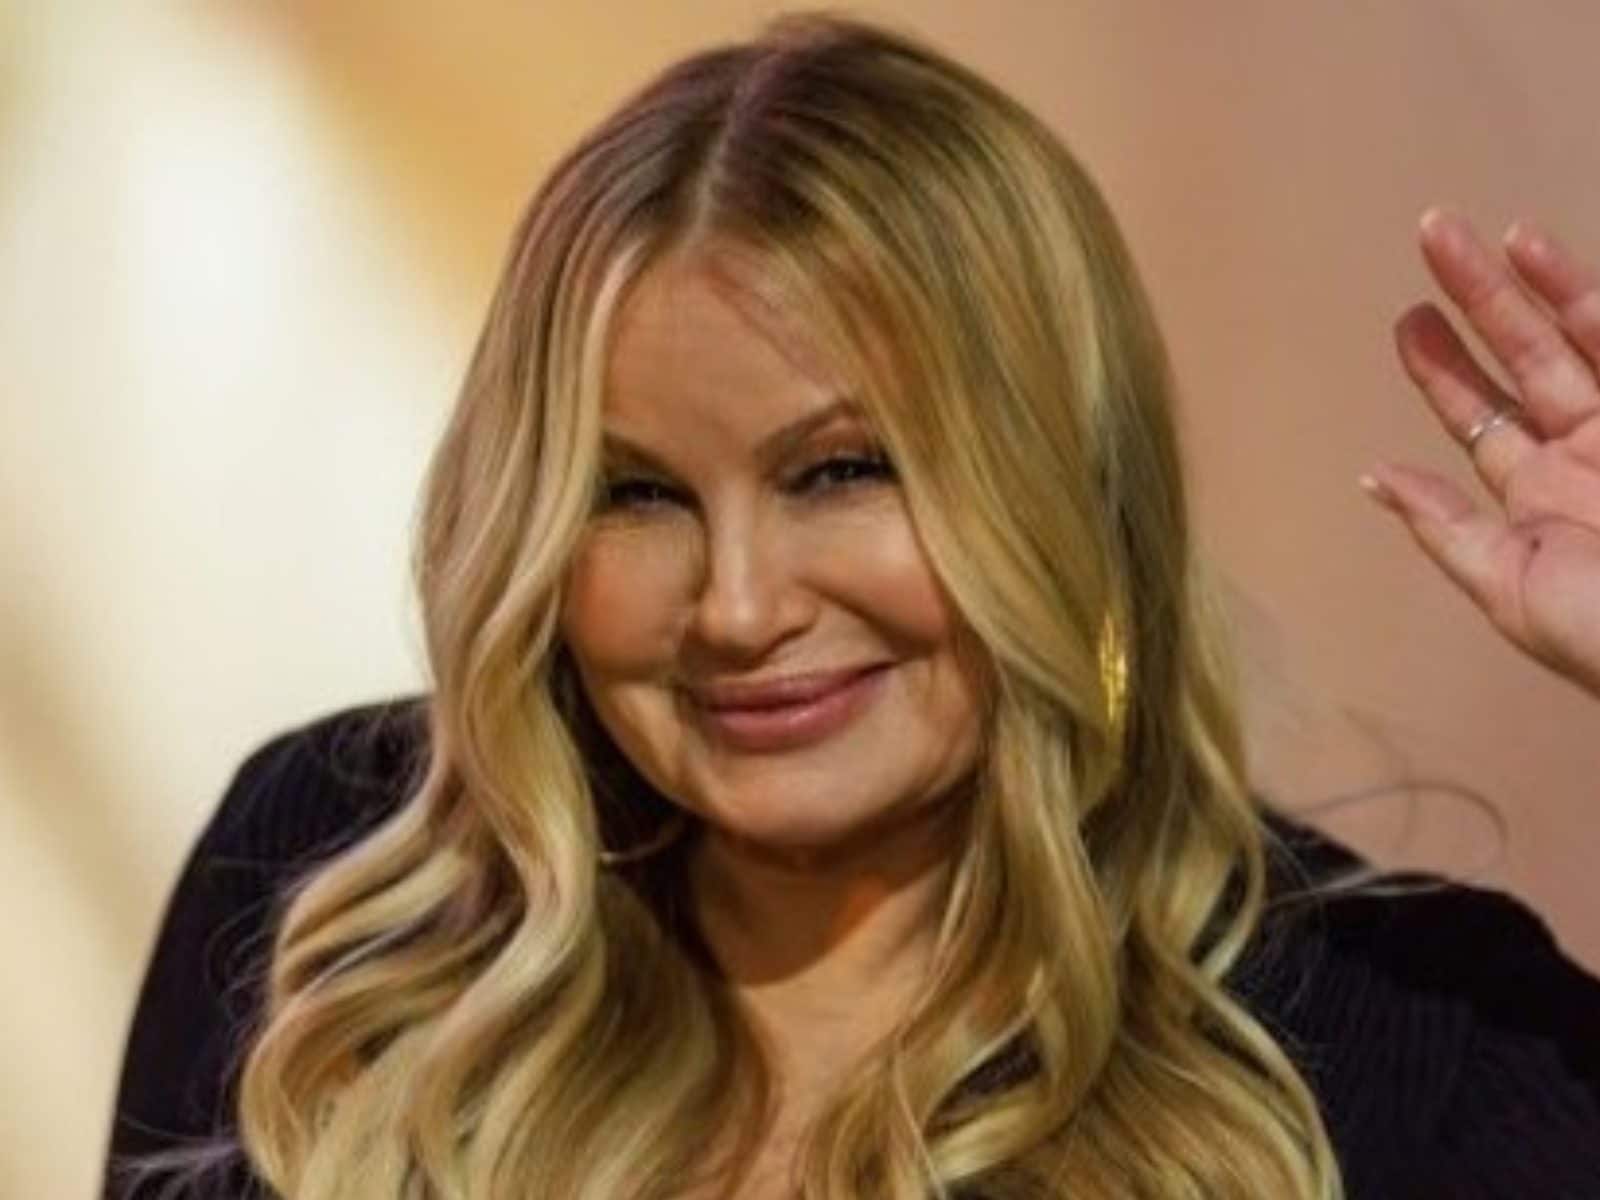 Open Fuck Urvashi Rautela - Jennifer Coolidge Admits To Sleeping With 200 People After American Pie:  'Got Lots Of Sexual Action' - News18